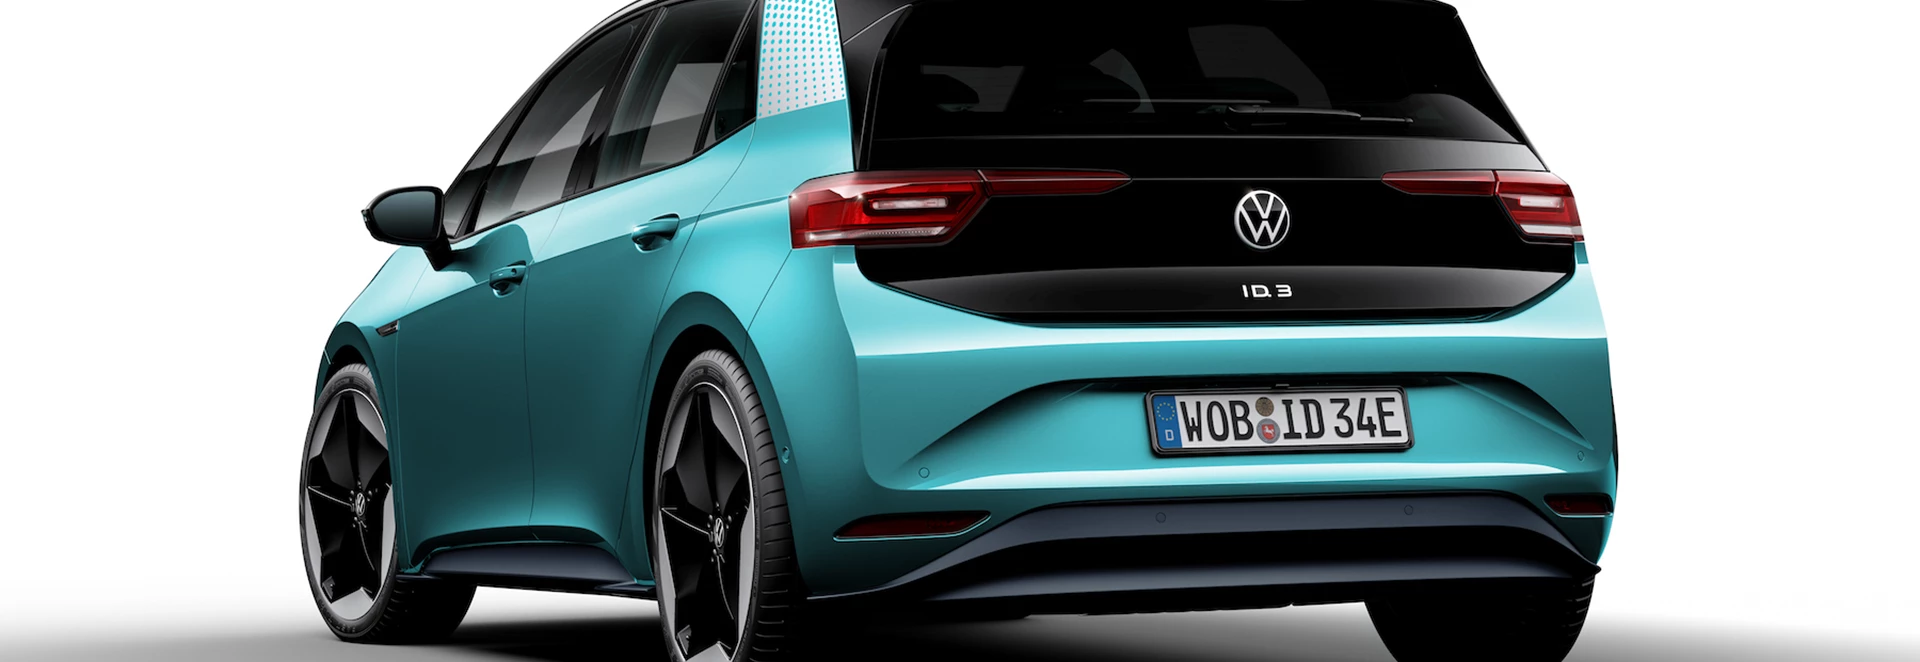 Volkswagen set to use ‘GTX’ name for high-performance EVs 